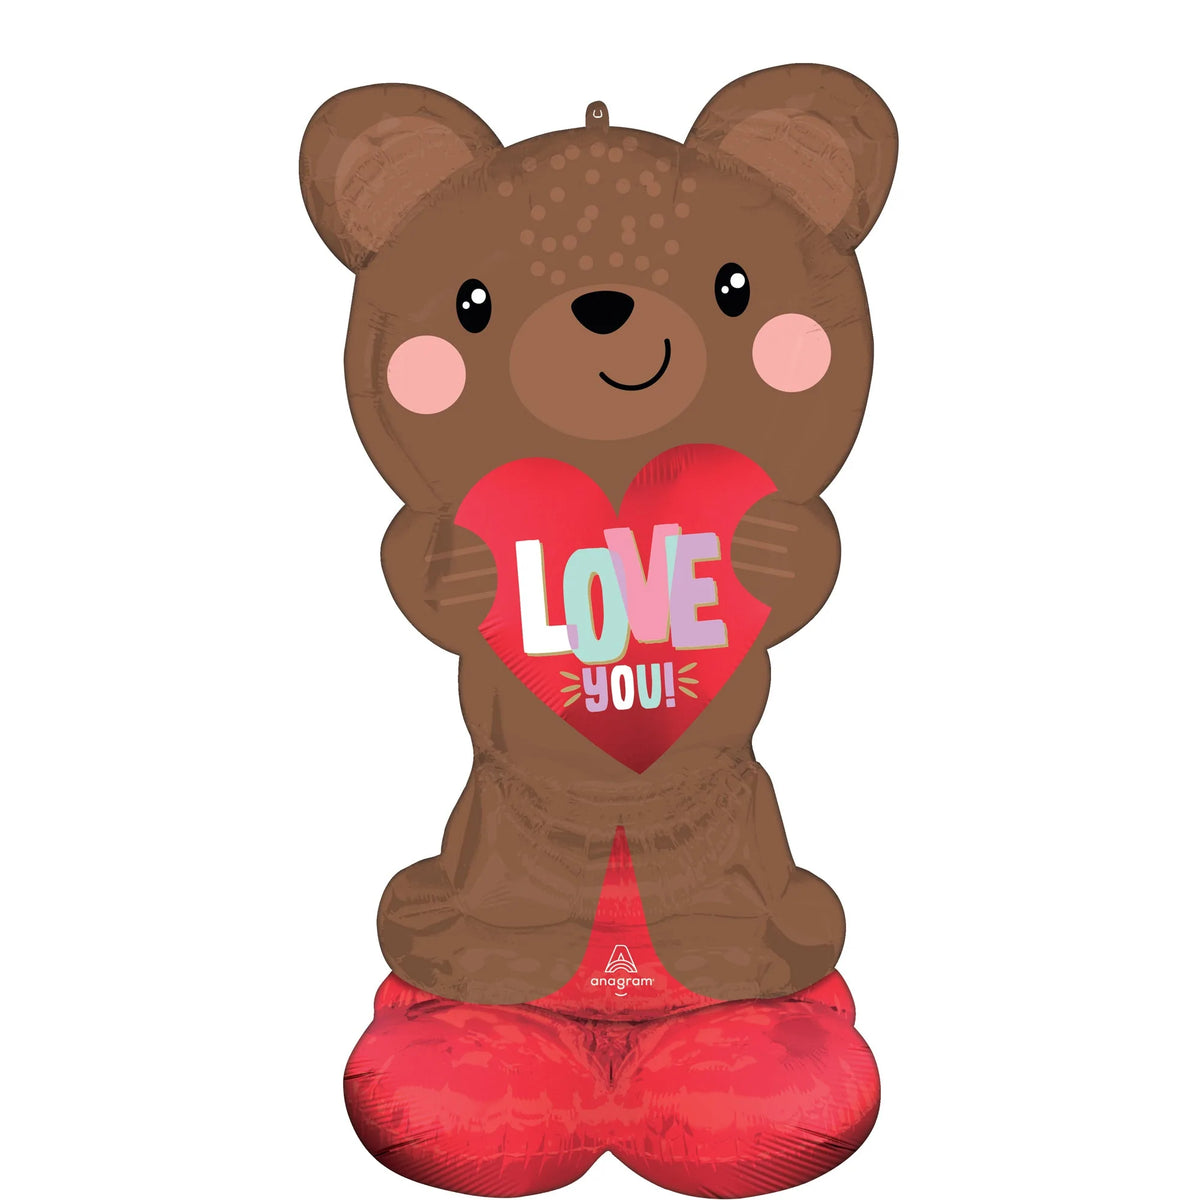 LE GROUPE BLC INTL INC Balloons Satin Brown "Love You" Teddy Bear Airloonz Standing Foil Air-Filled Balloon, 27 X 49 Inches, 1 Count